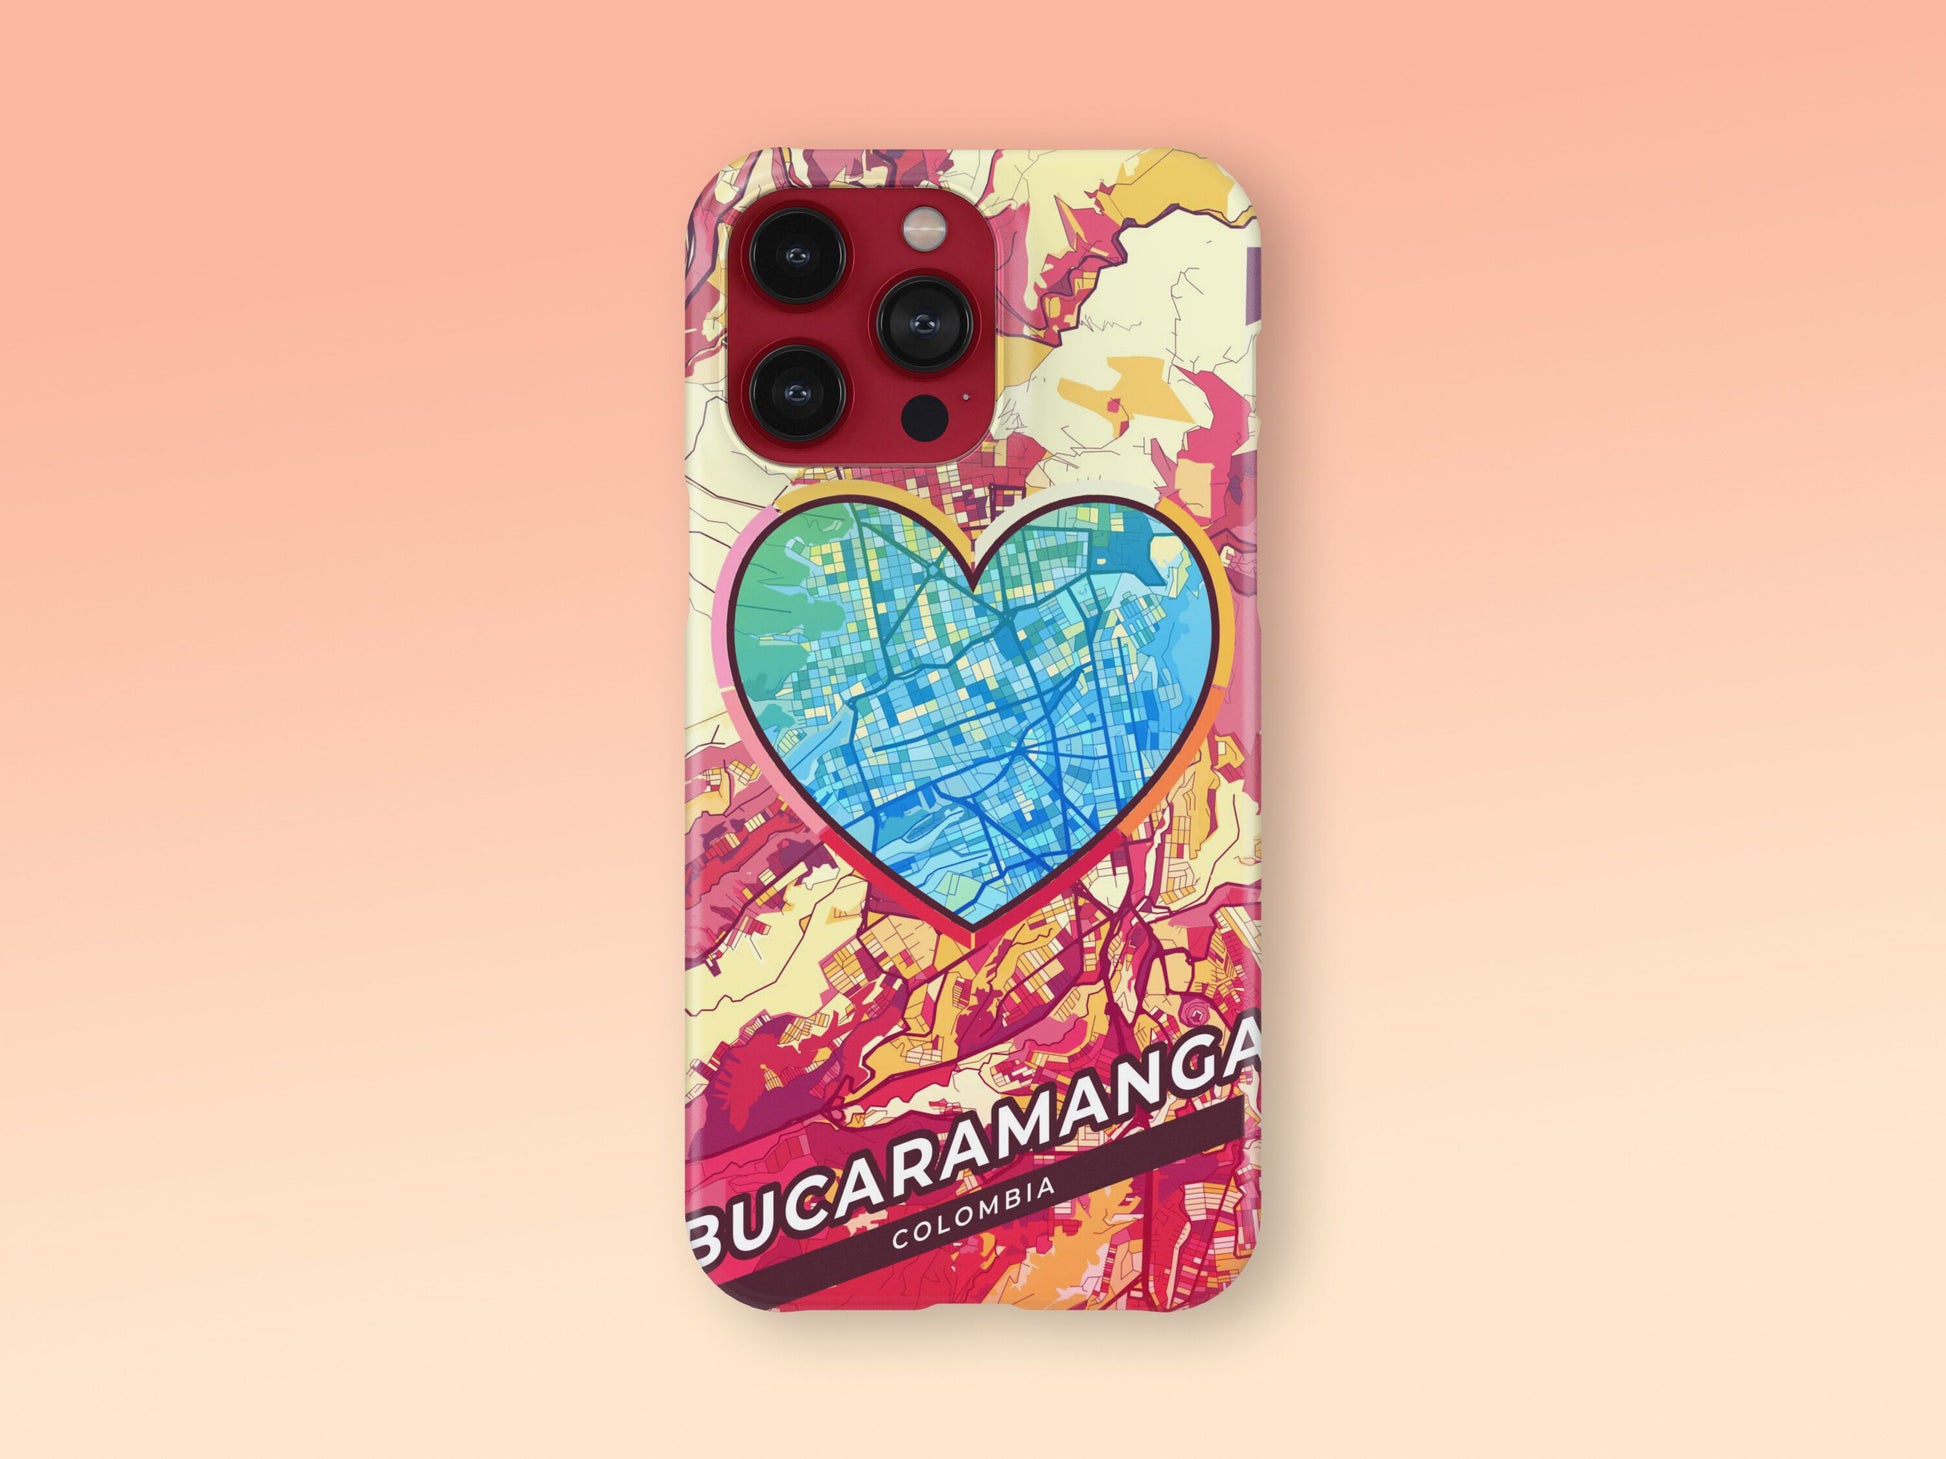 Bucaramanga Colombia slim phone case with colorful icon. Birthday, wedding or housewarming gift. Couple match cases. 2